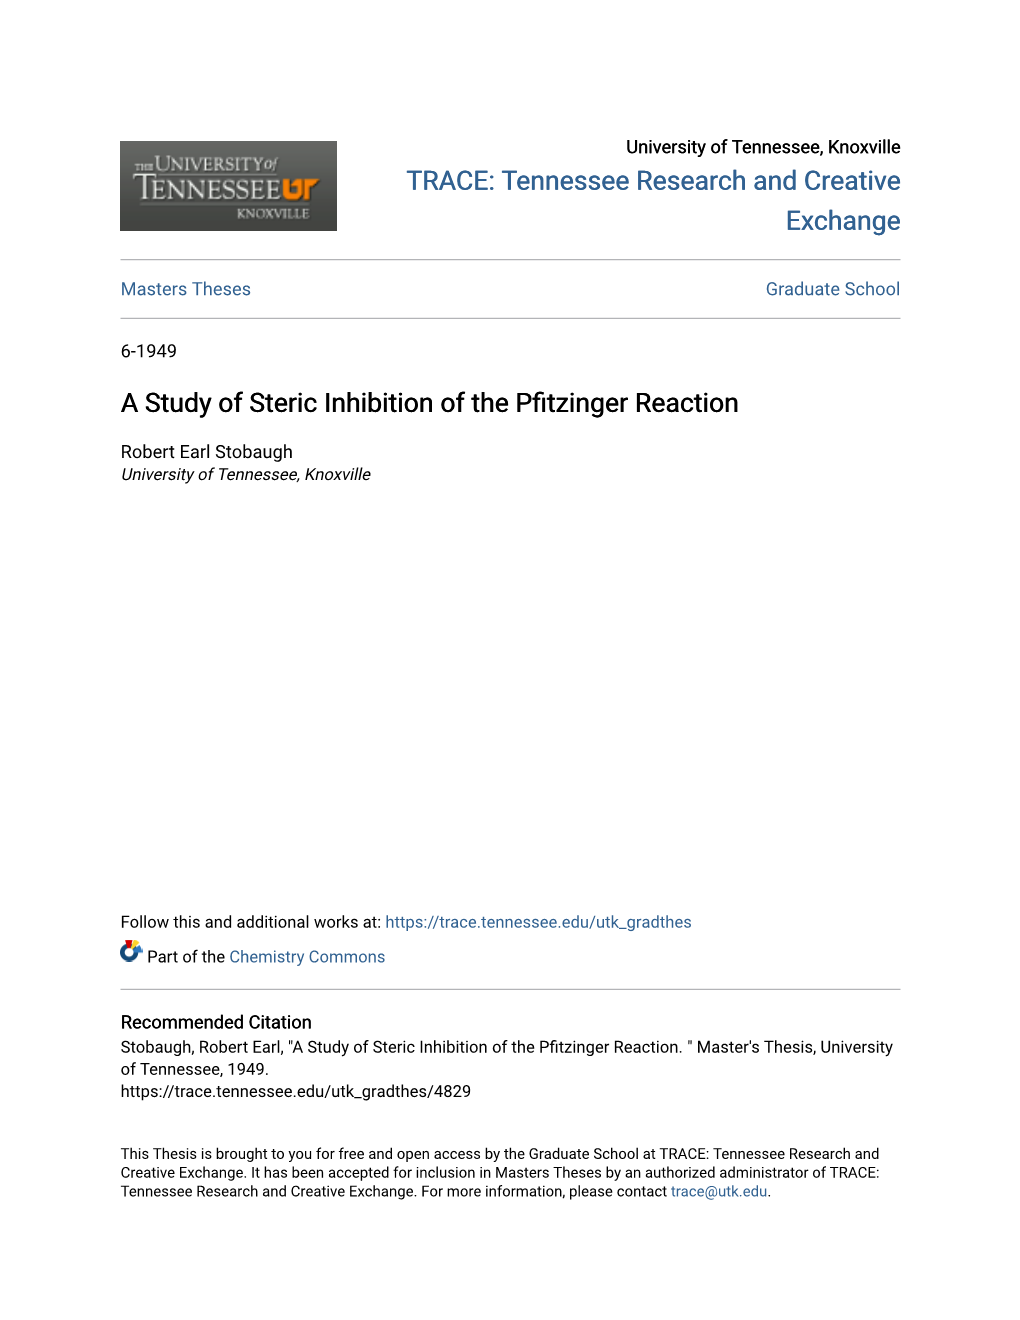 A Study of Steric Inhibition of the Pfitzinger Reaction